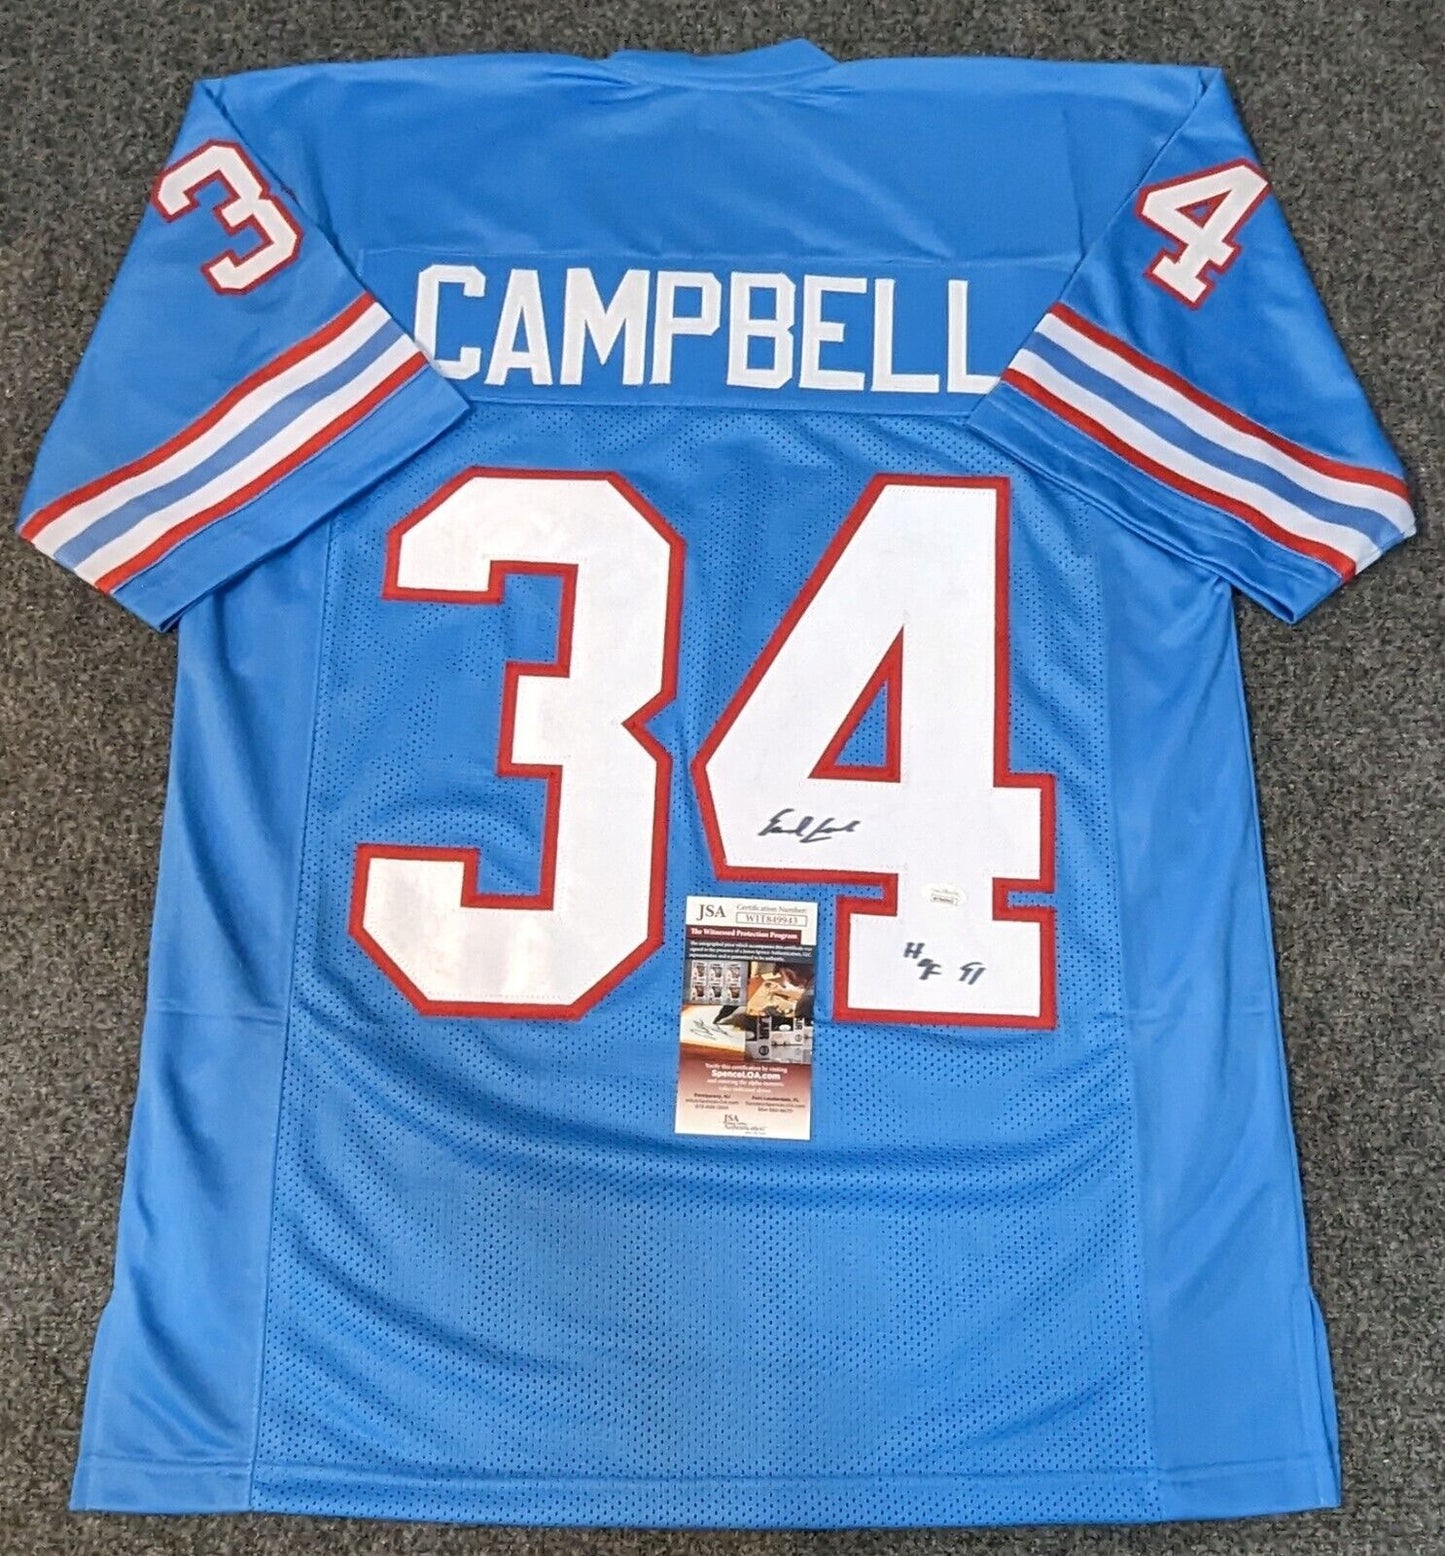  Earl Campbell Autographed White Longhorns Jersey - Beautifully  Matted and Framed - Hand Signed By Earl Campbell and Certified Authentic by  Auto JSA COA - Includes Certificate of Authenticity : Sports & Outdoors